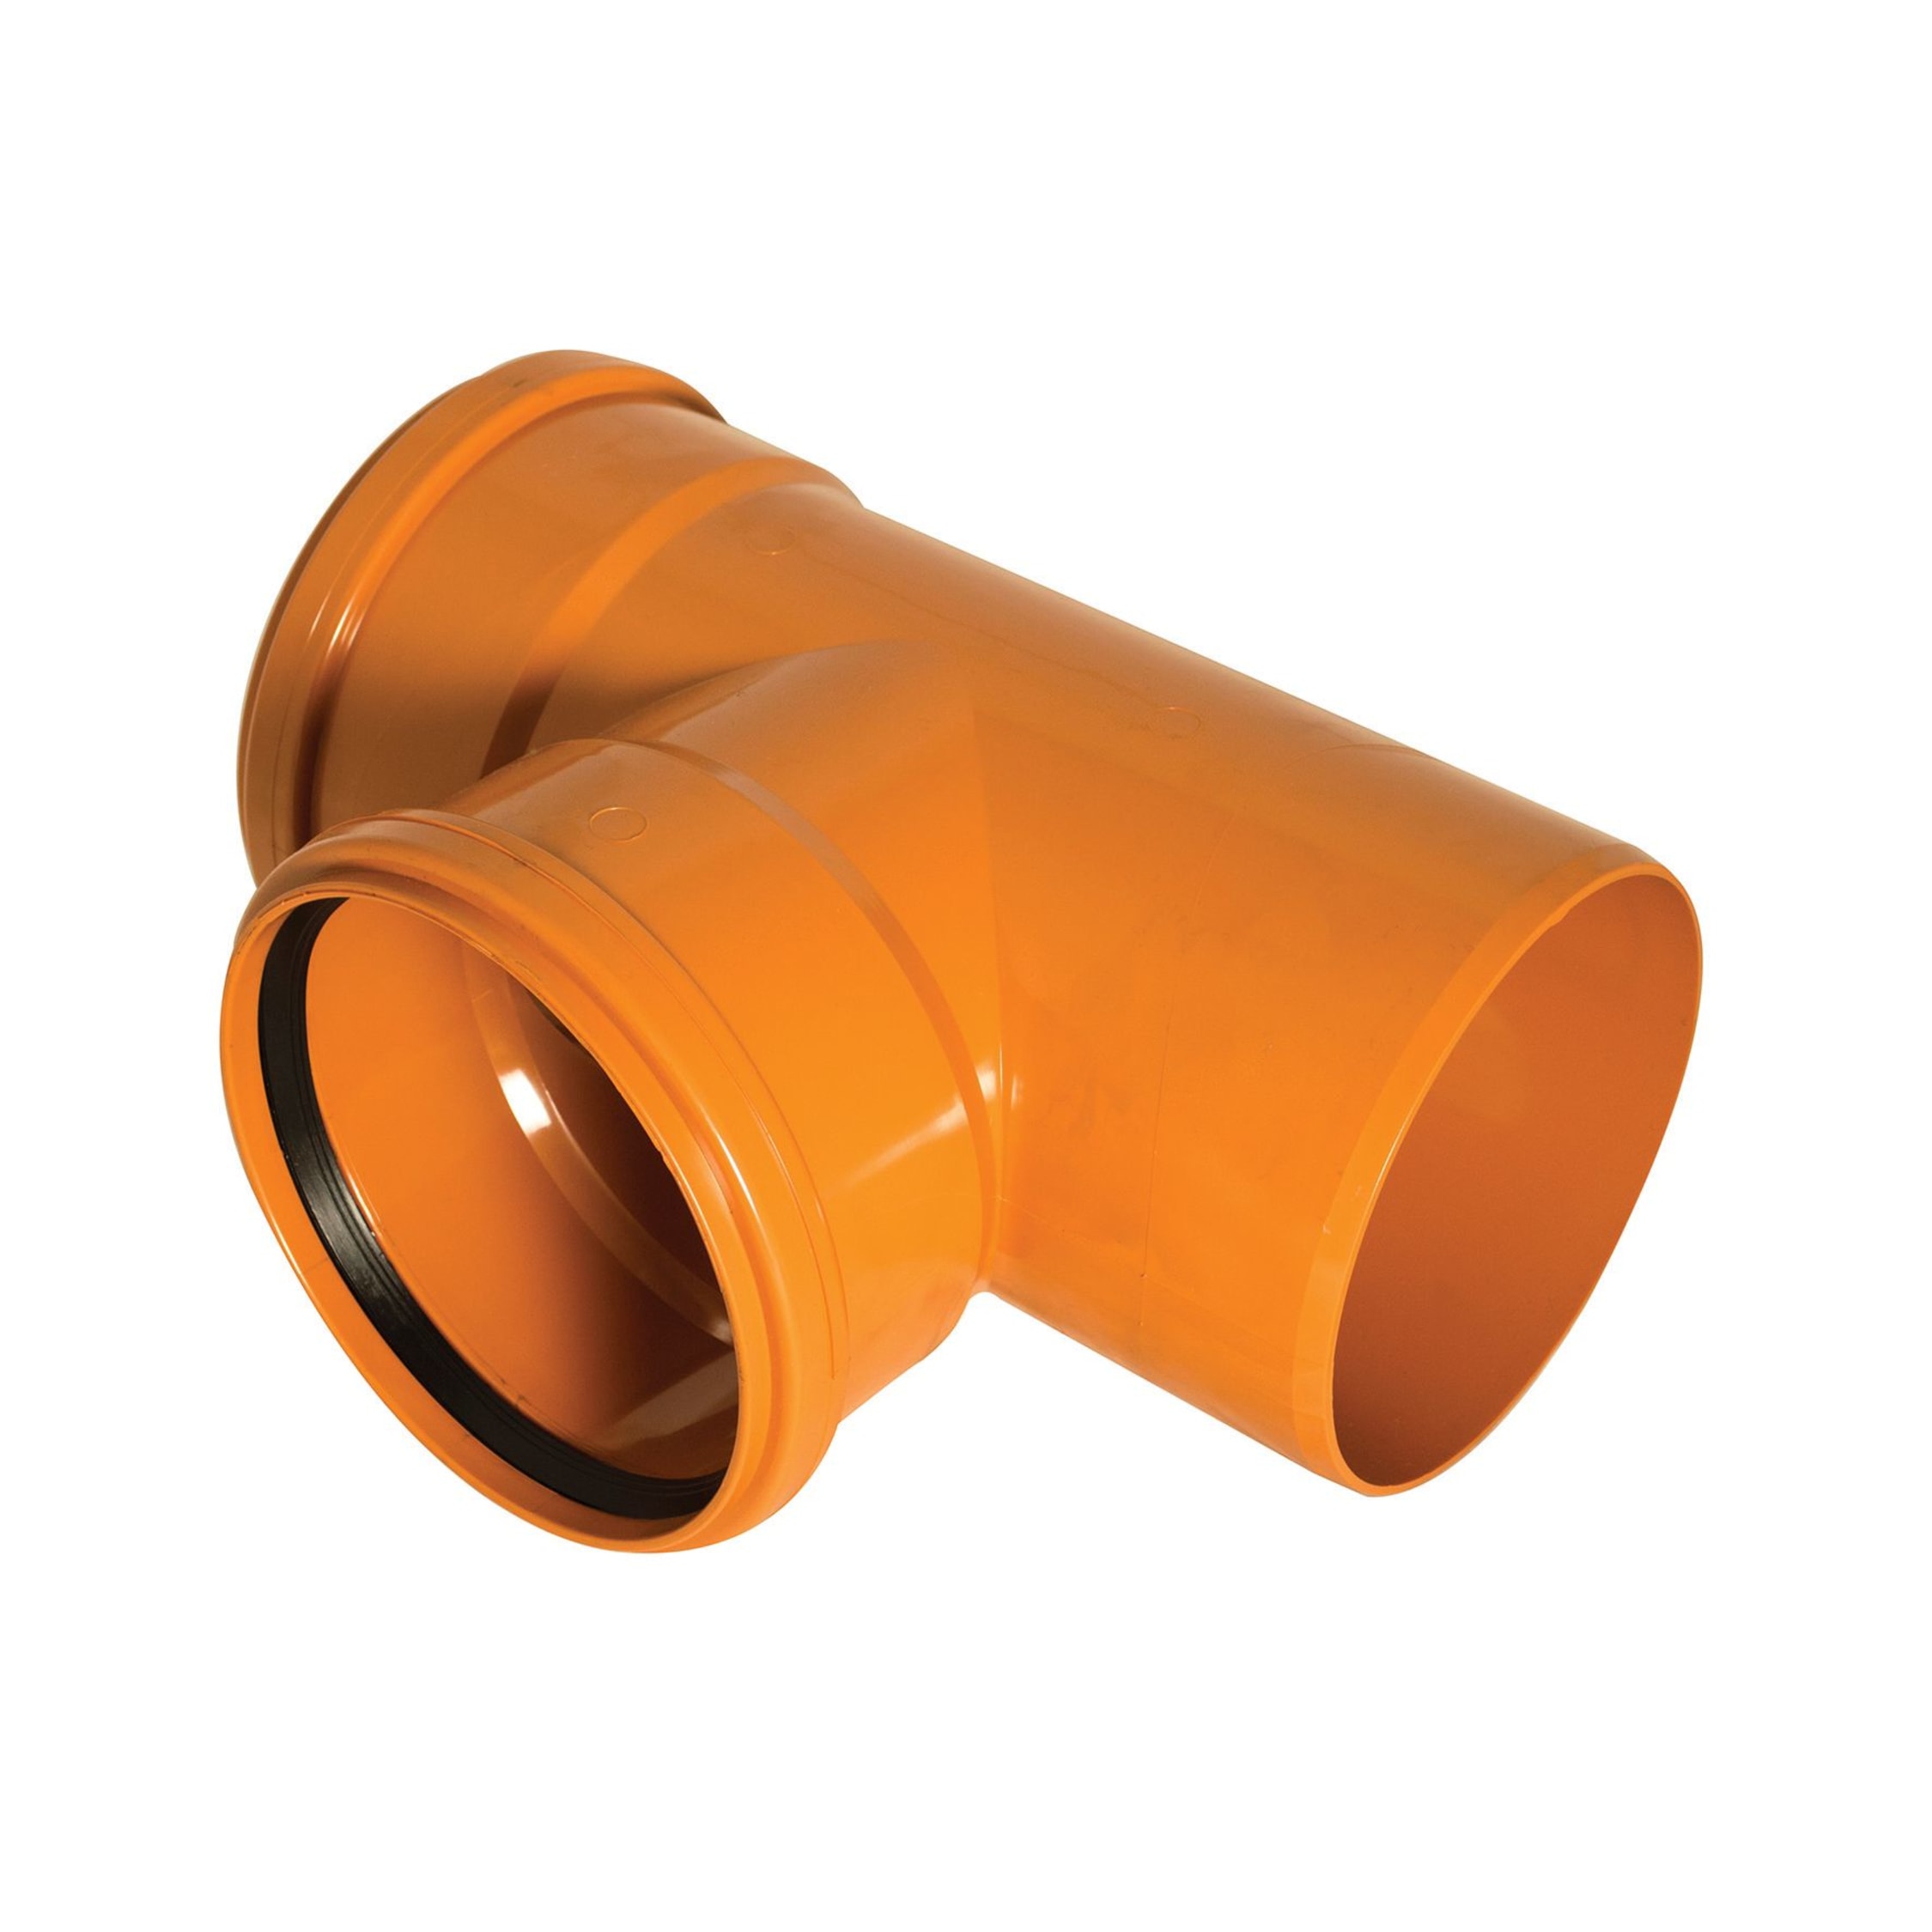 1 x 110mm Underground 87.5 Degree Double Socket Equal Junction Terracotta 90 